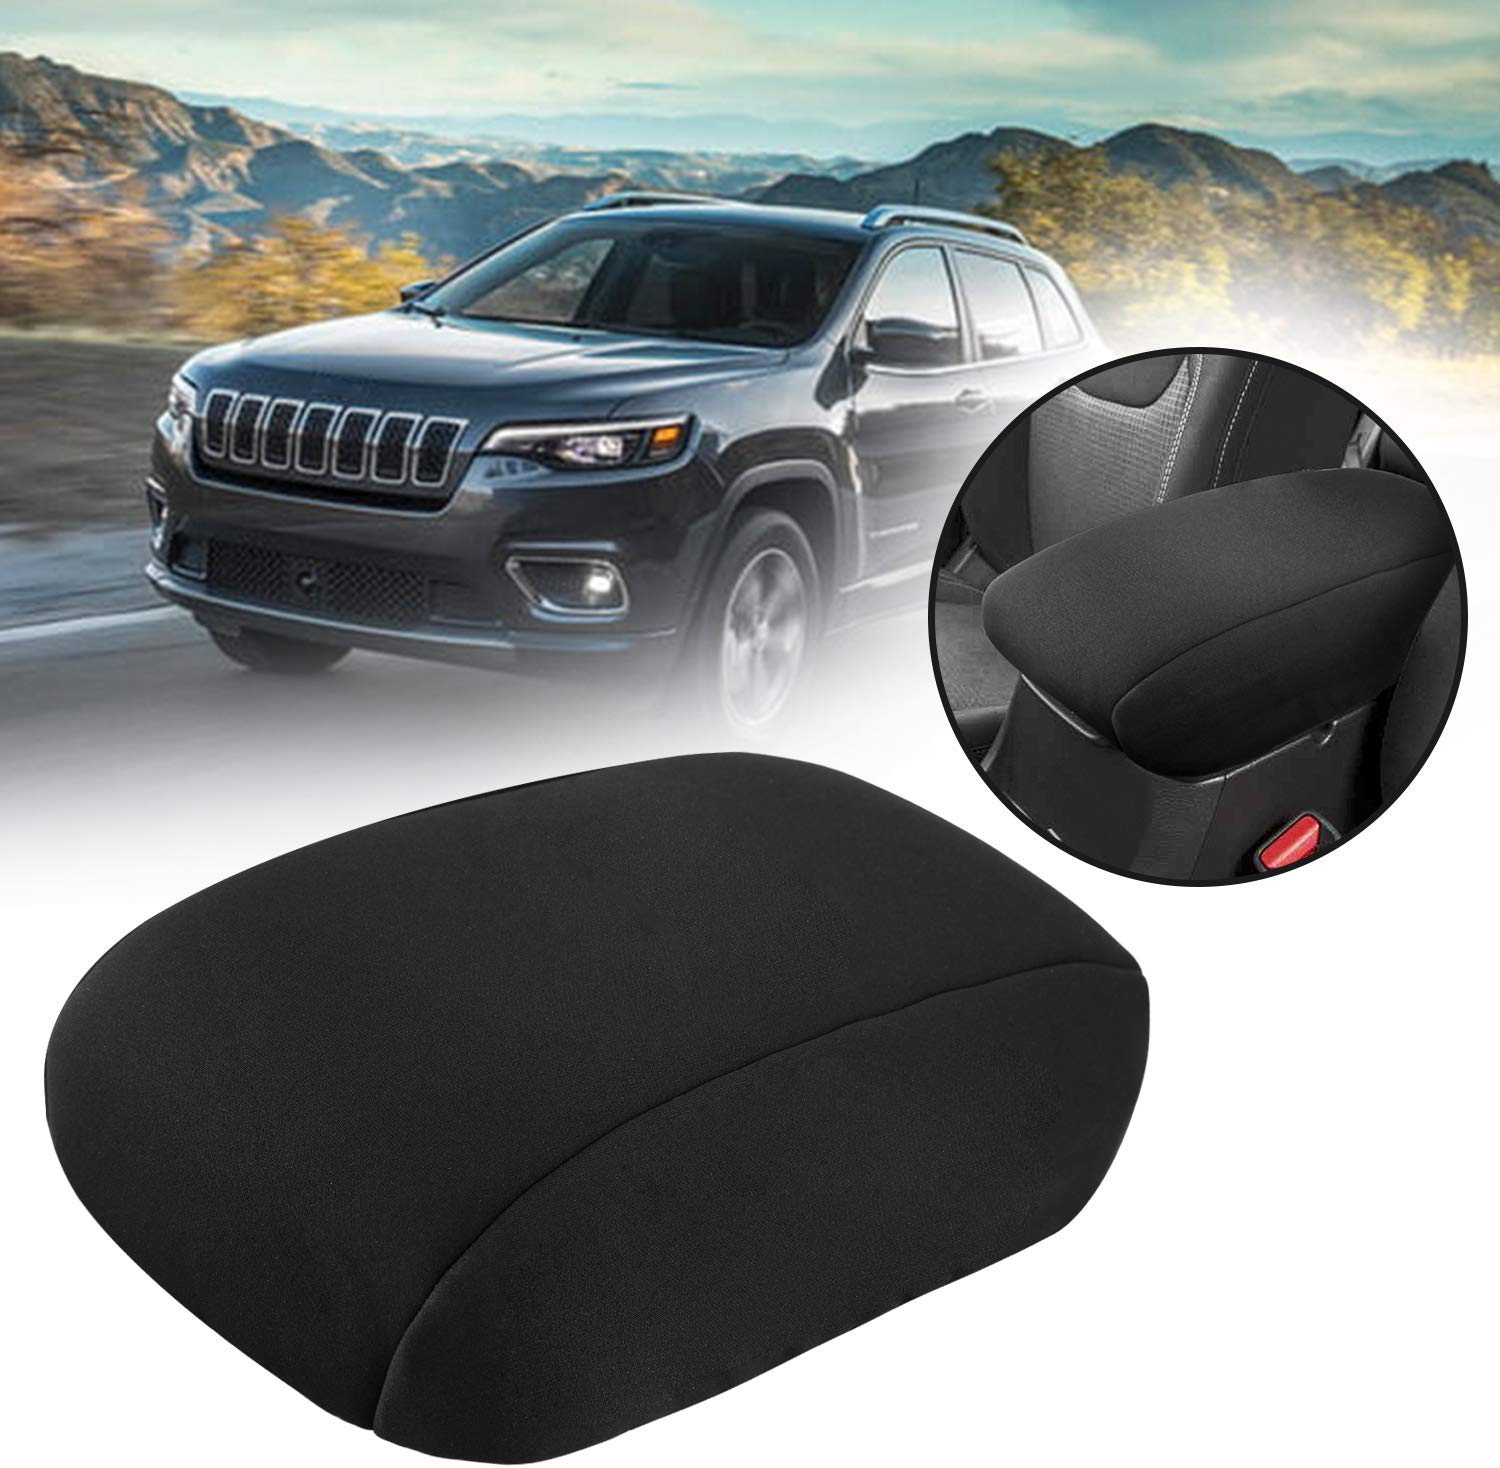 

Console Cover for Jeep Grand Cherokee 2011~2018 Neoprene Armrest Pad